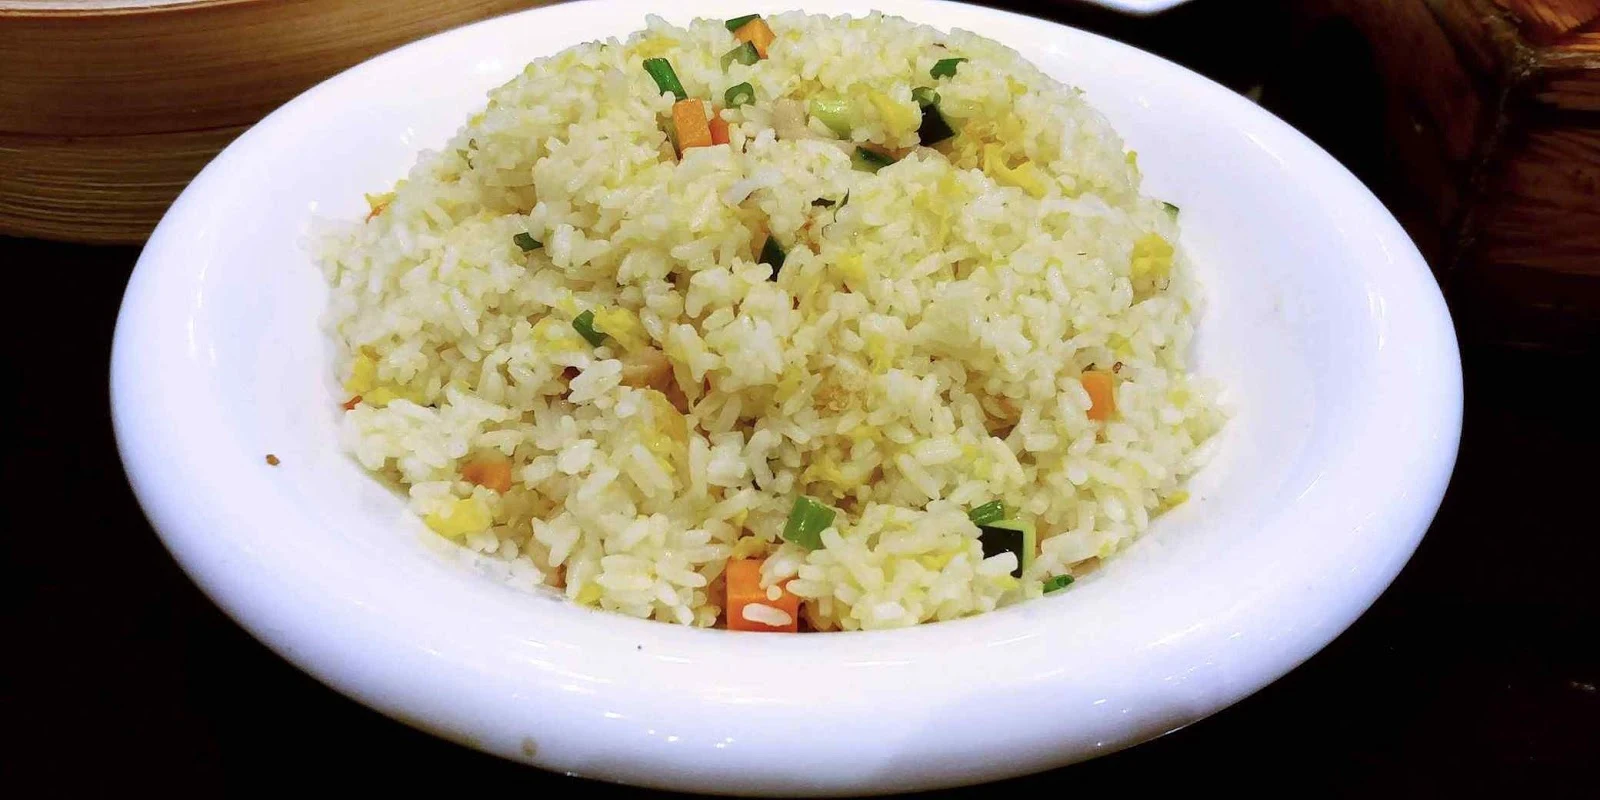 Lugang Cafe's Golden Fried Rice with Egg and Shredded Pork